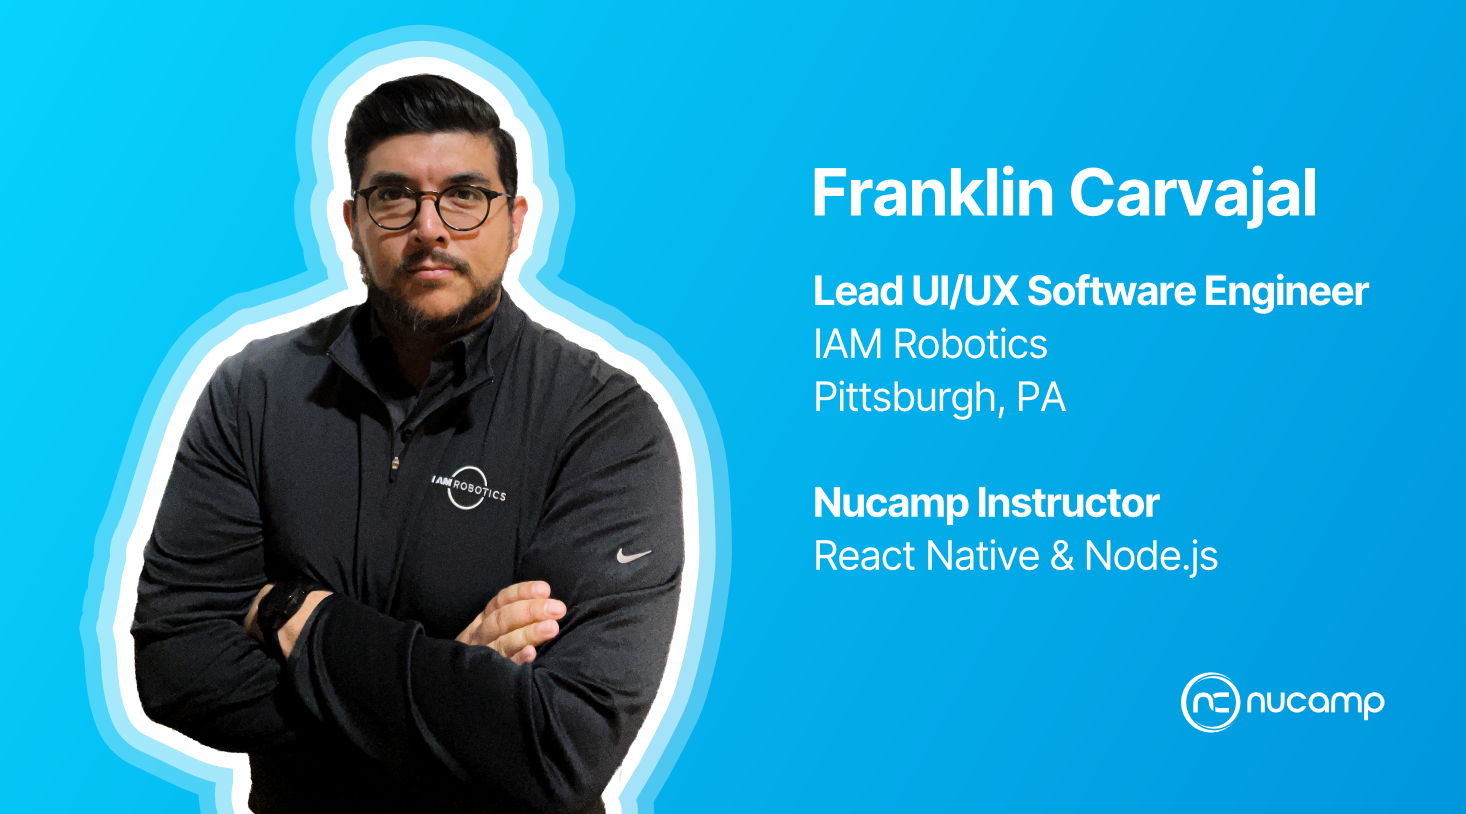 Behind the scenes of a Lead UI/UX Software Engineer who teaches at Nucamp